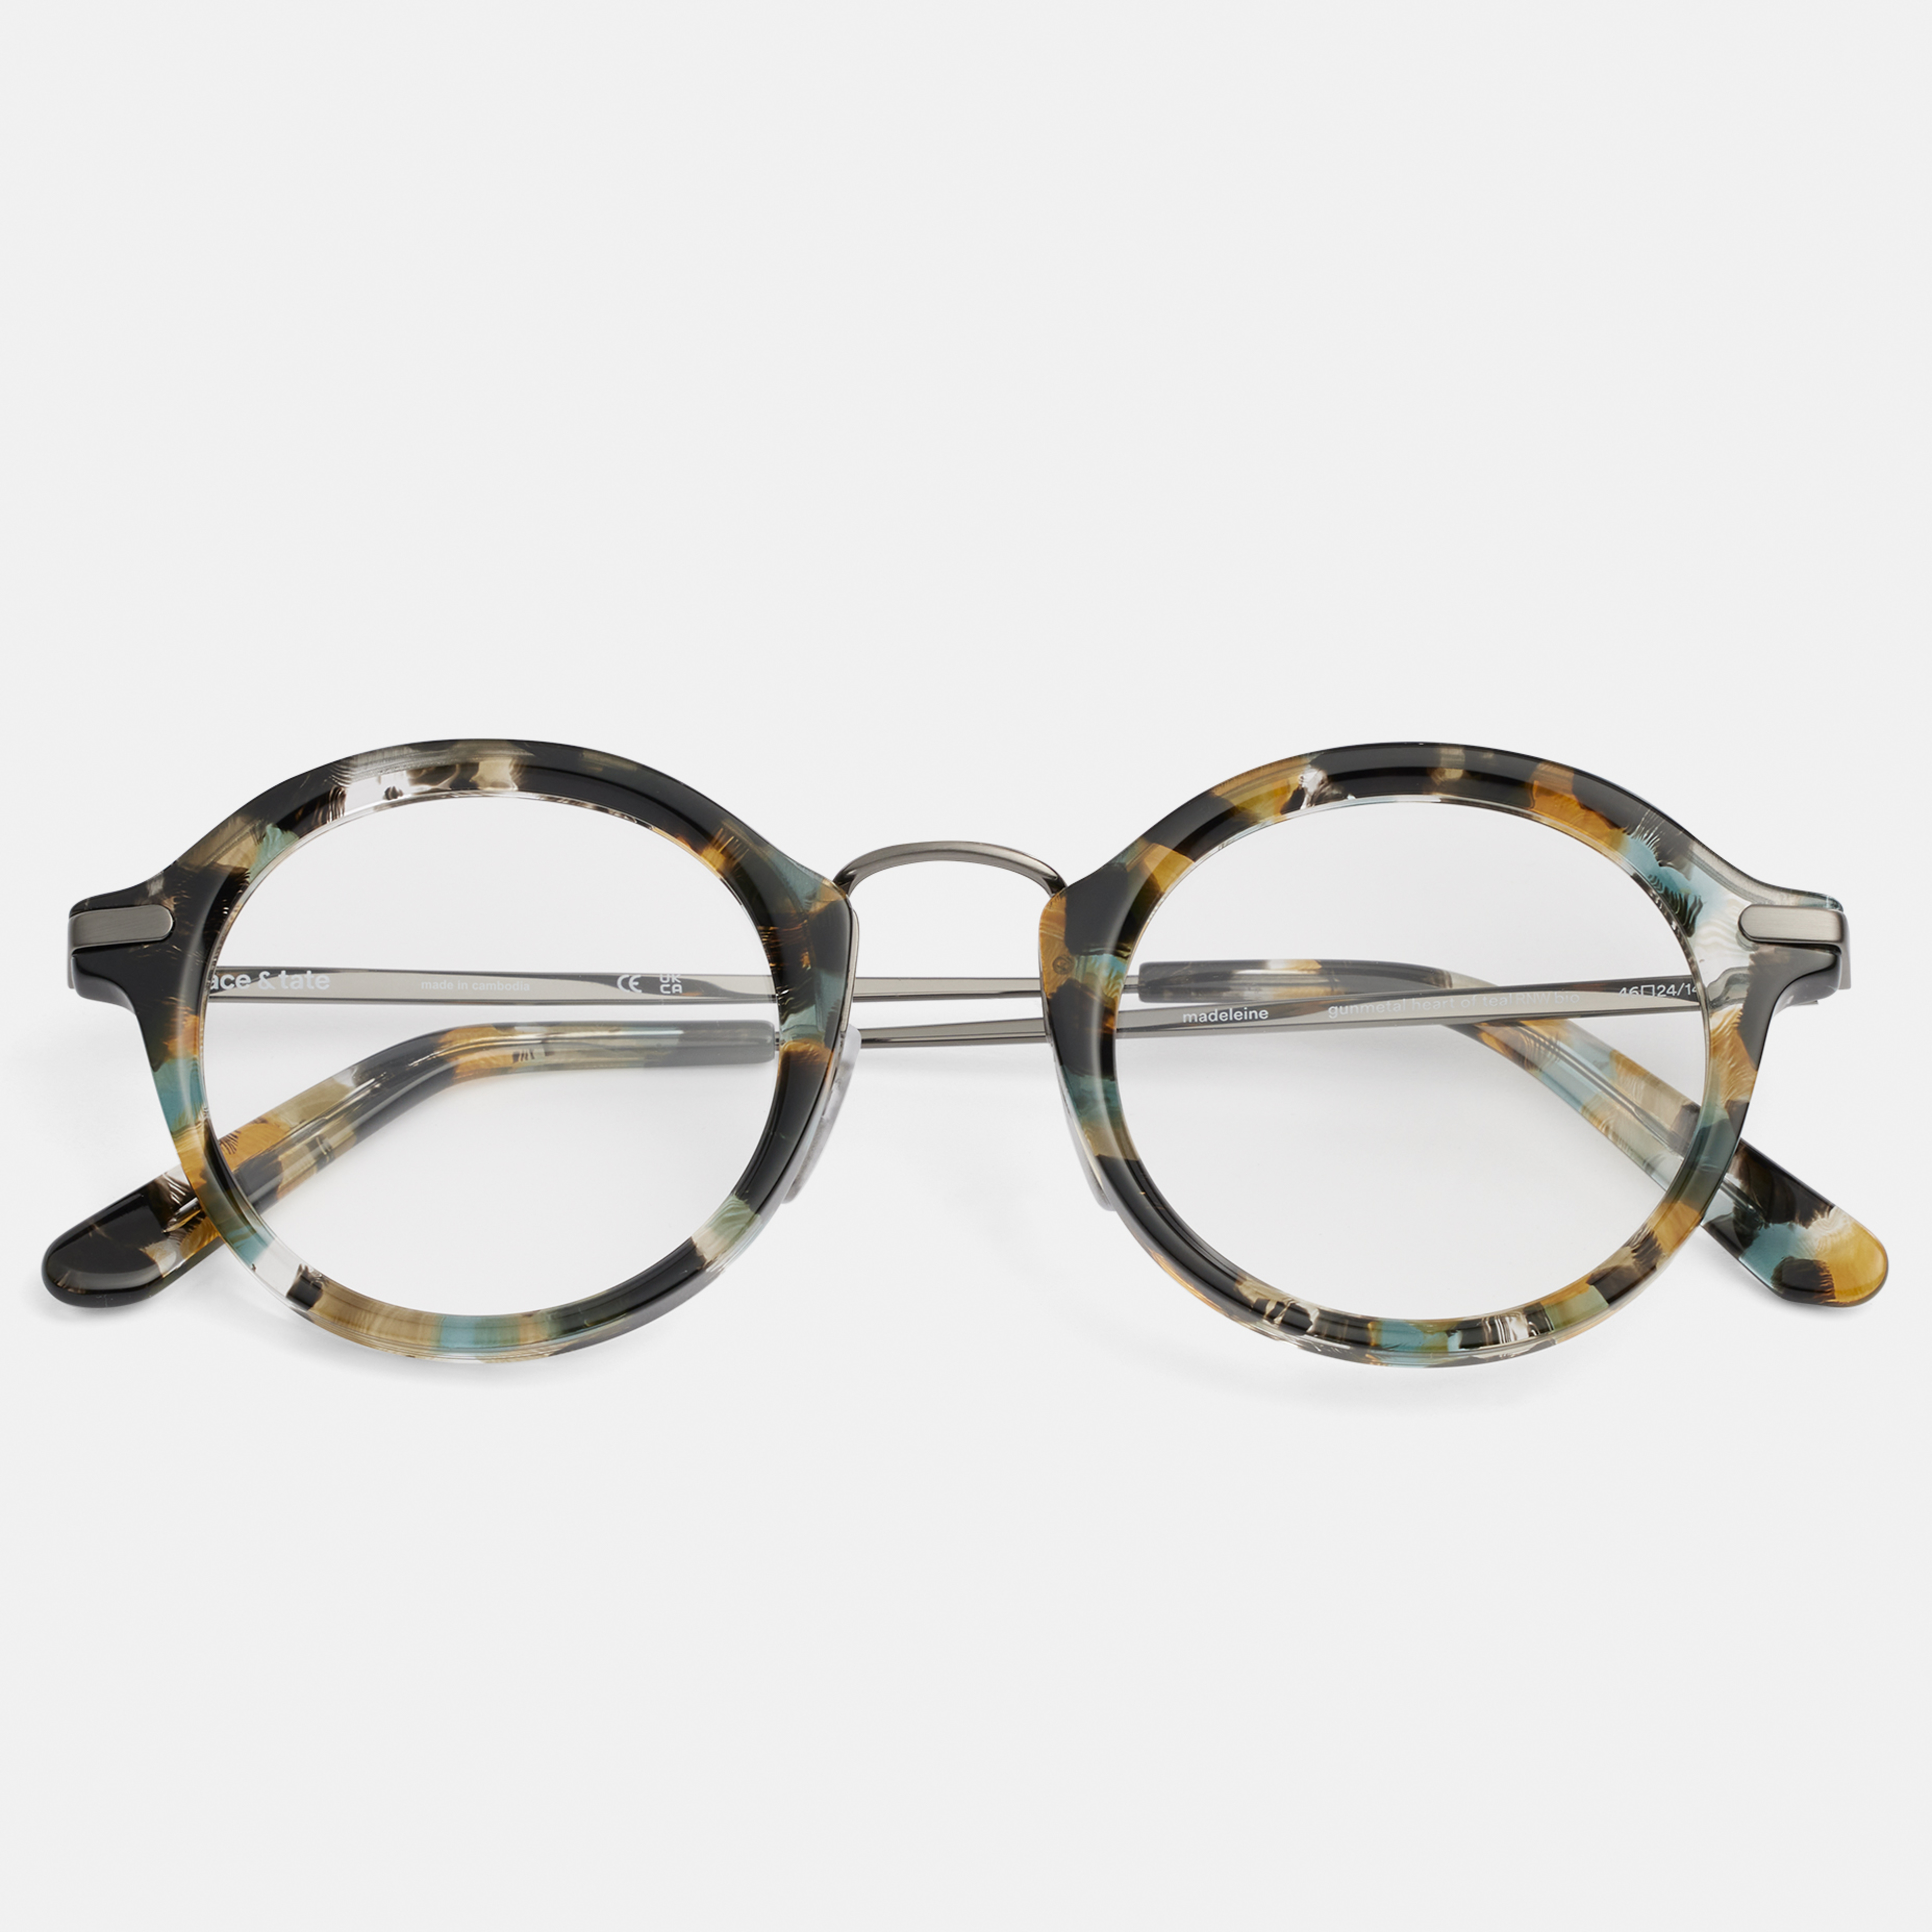 Ace & Tate Glasses |  Metal in Black, Blue, Yellow